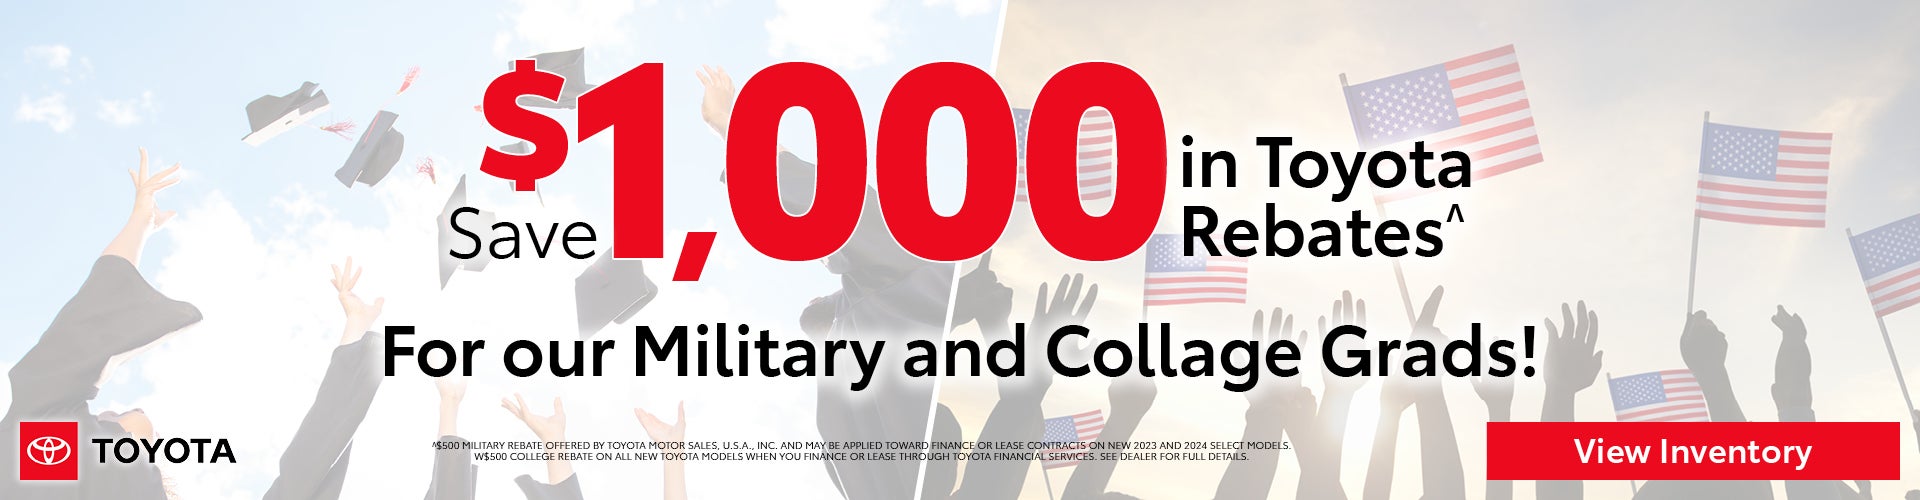 $1,000 Rebate for Military and College Grads